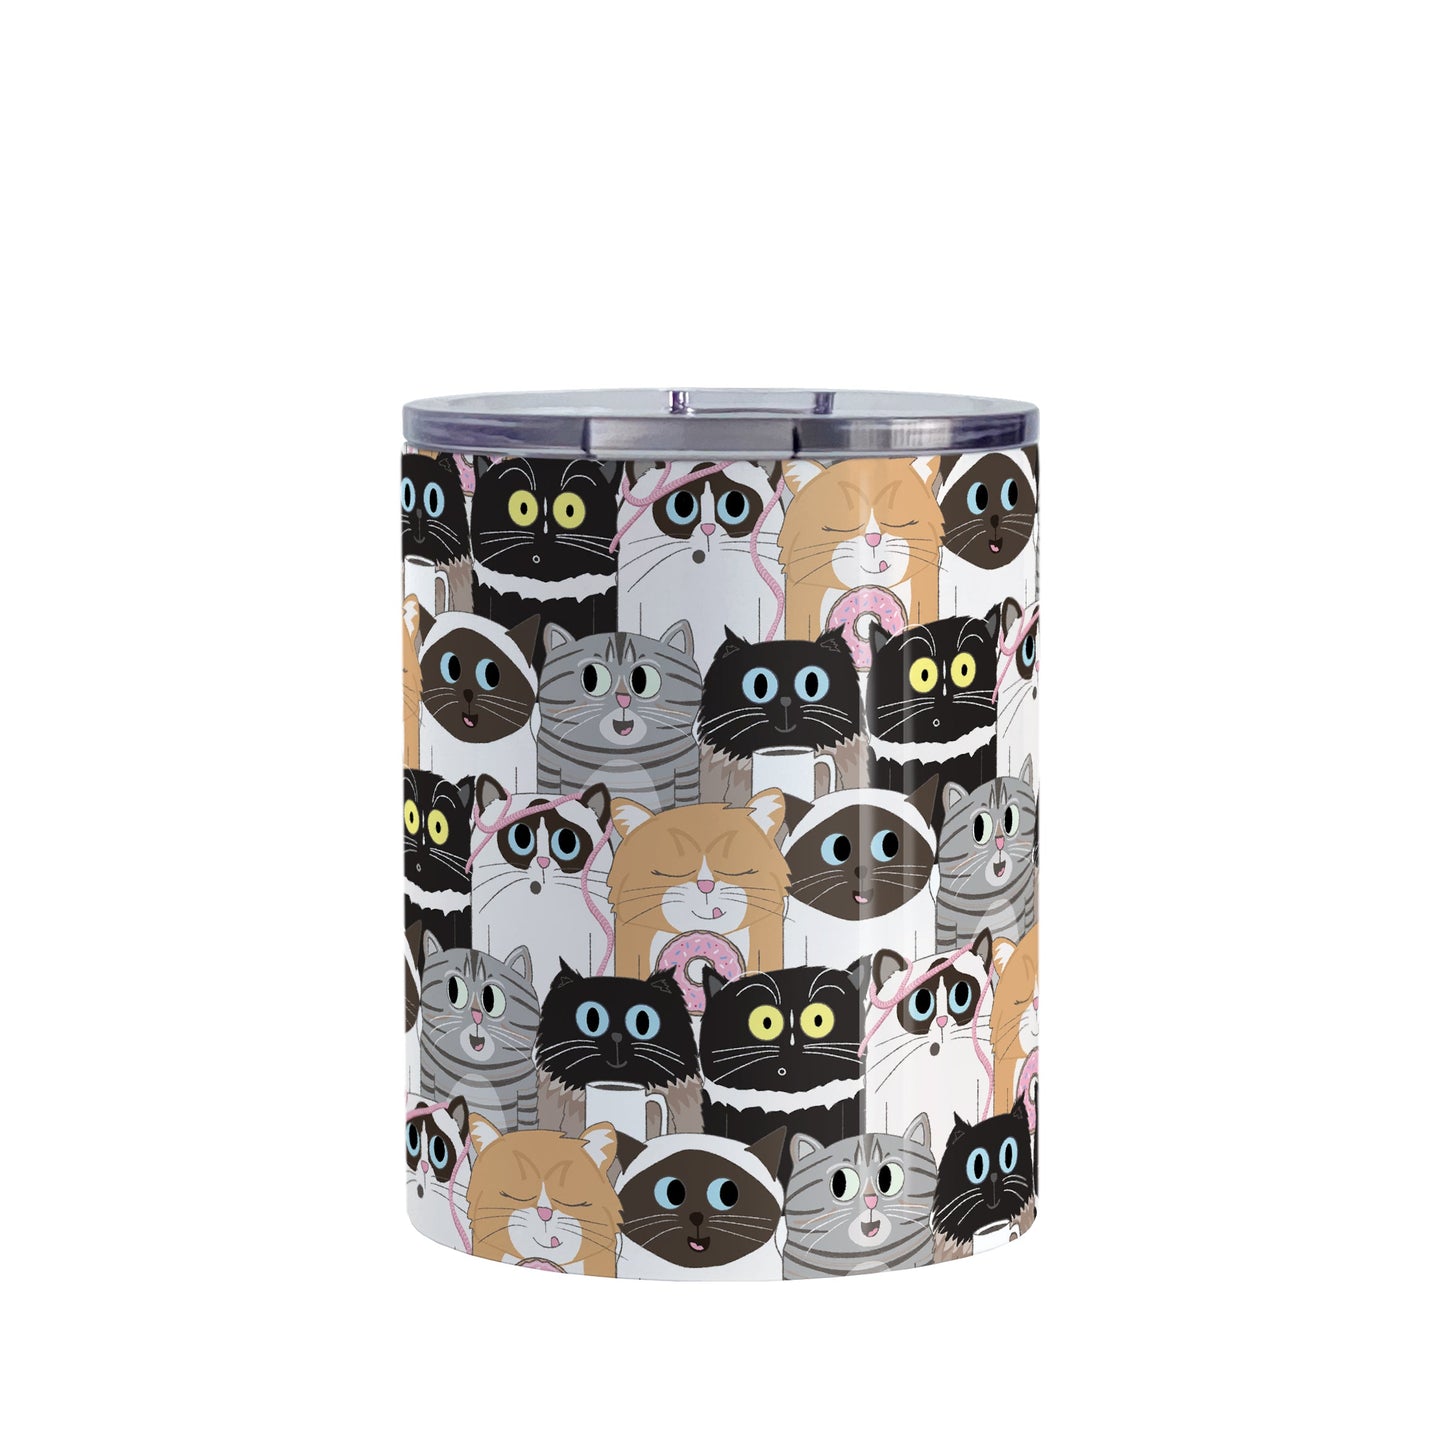 Cute Cat Stack Pattern Tumbler Cup (10oz, stainless steel insulated) at Amy's Coffee Mugs. Cute cats tumbler cup with an illustrated pattern of different breeds of cats with different fun expressions, with yarn, coffee, and donuts. This stacked pattern of cats wraps around the cup.